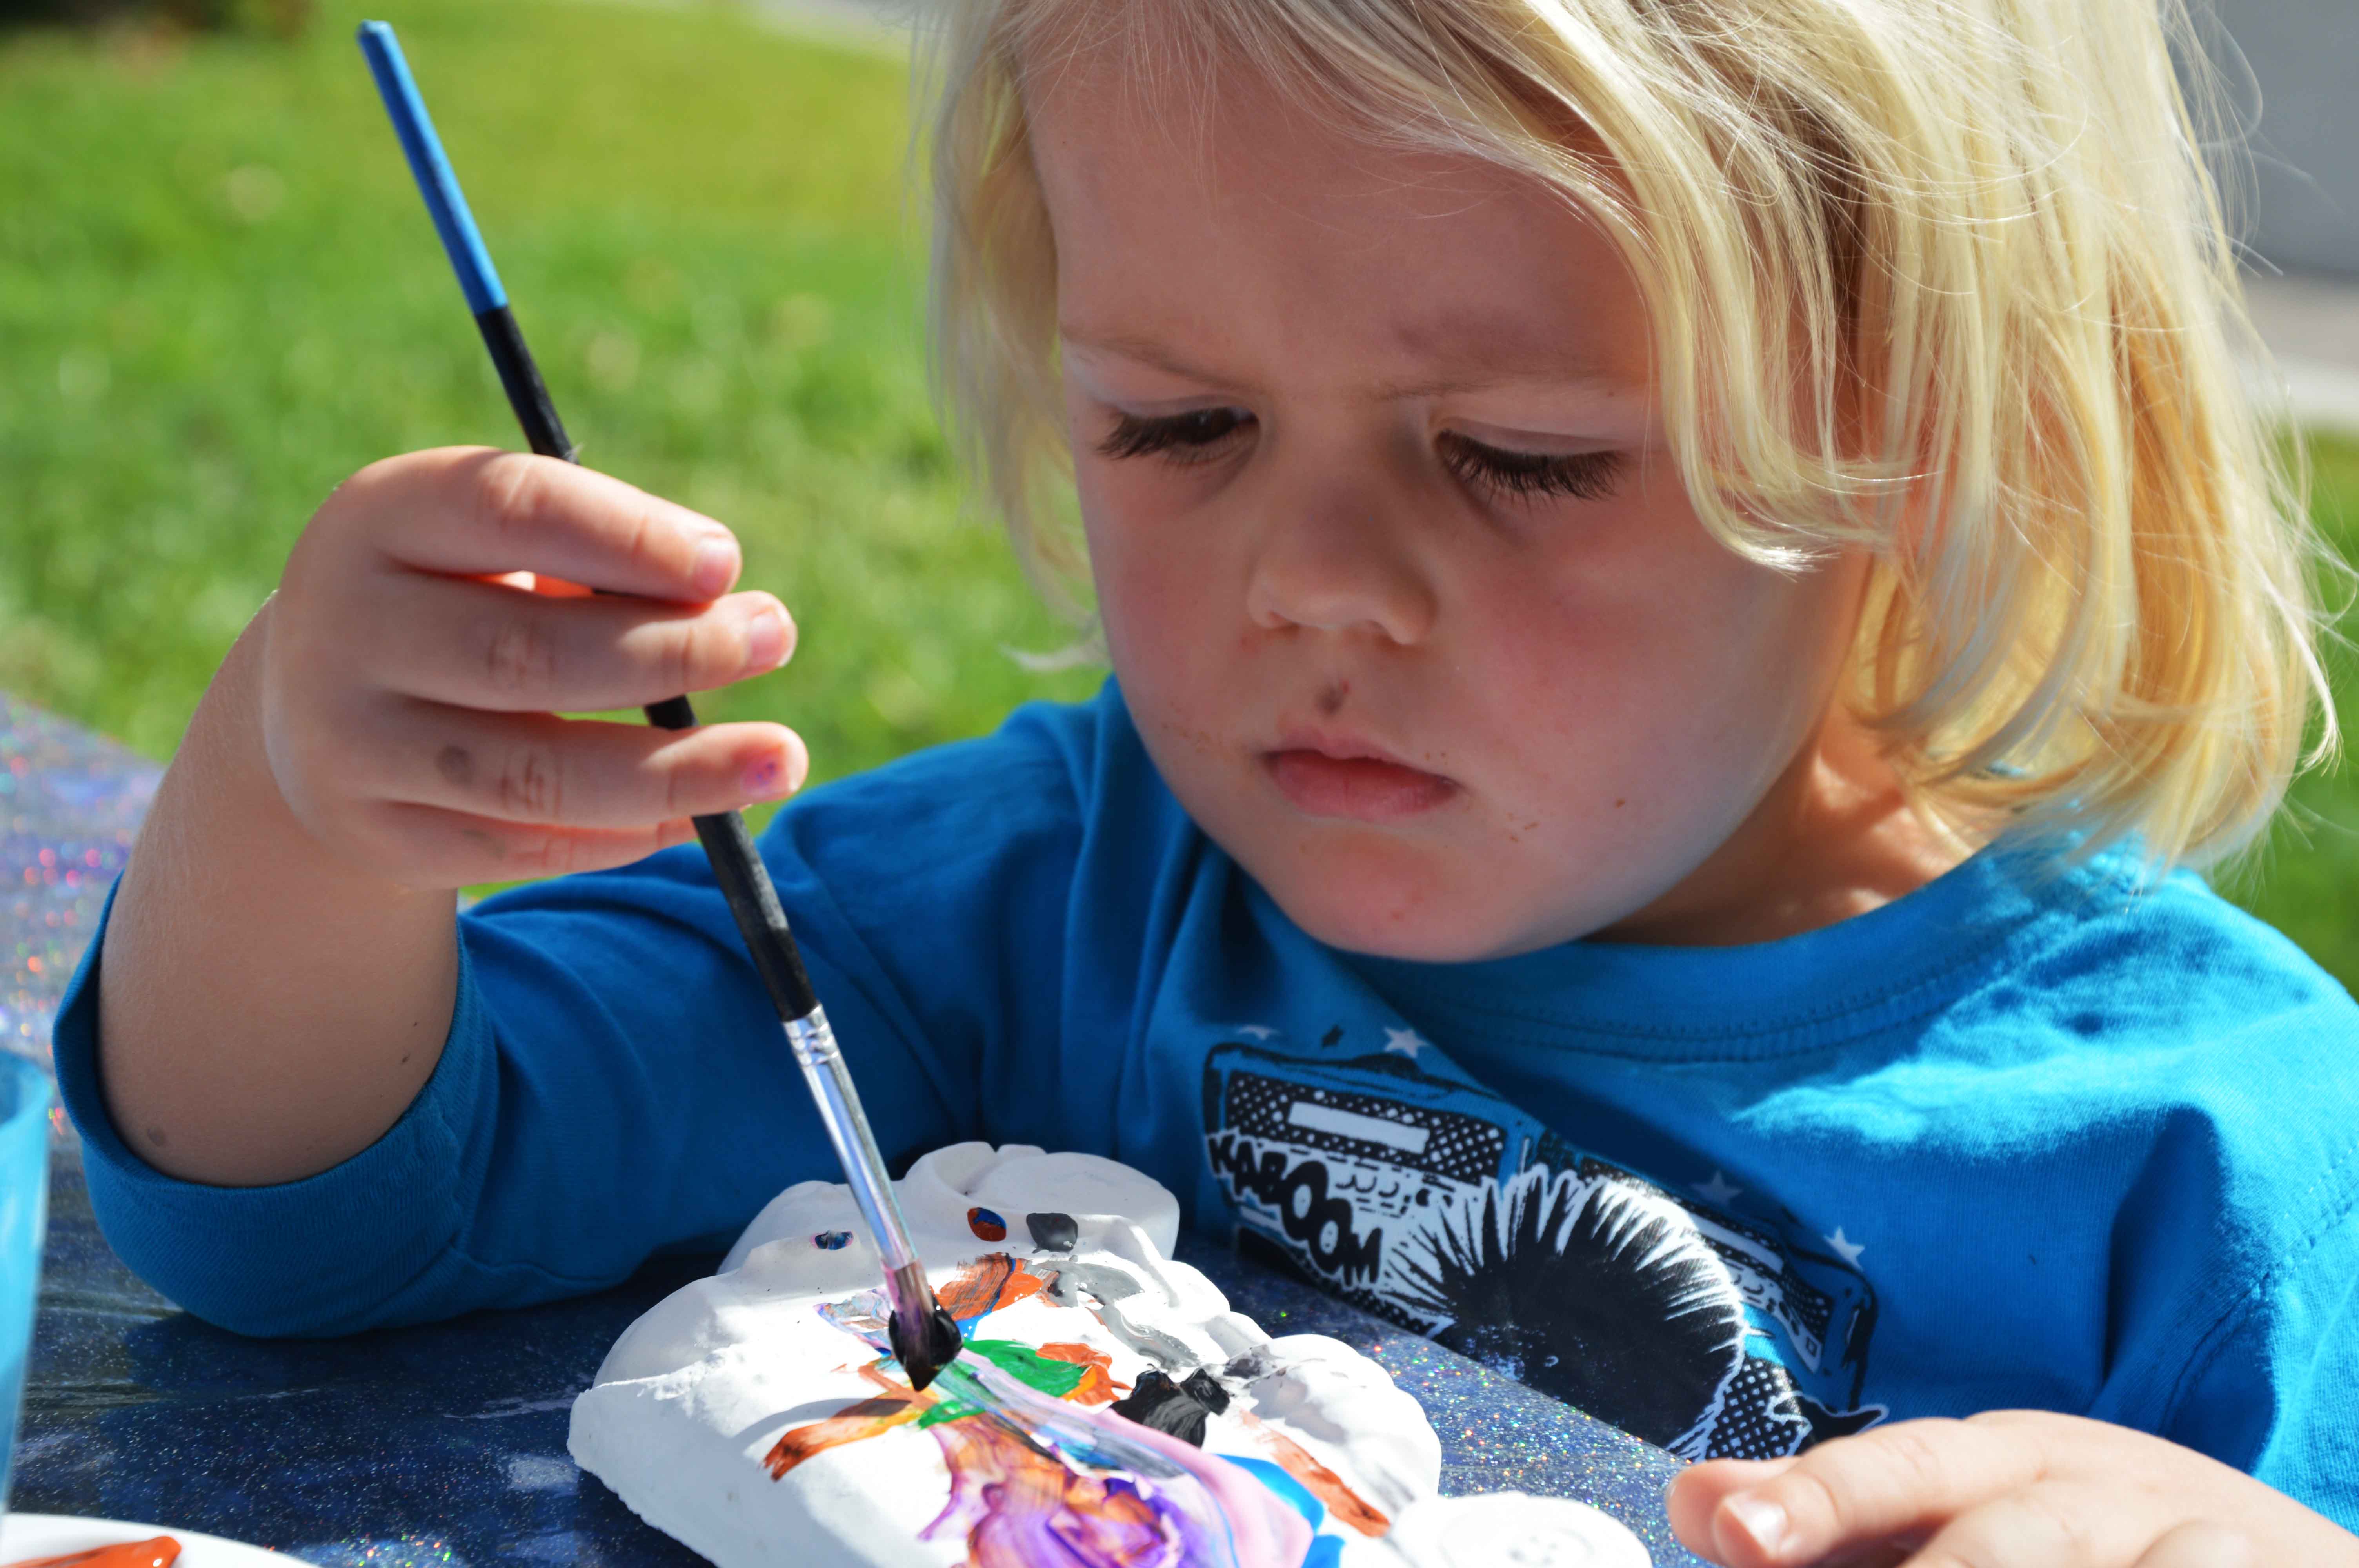 How to Run a Kids Plaster Painting Party in 12 Easy Steps